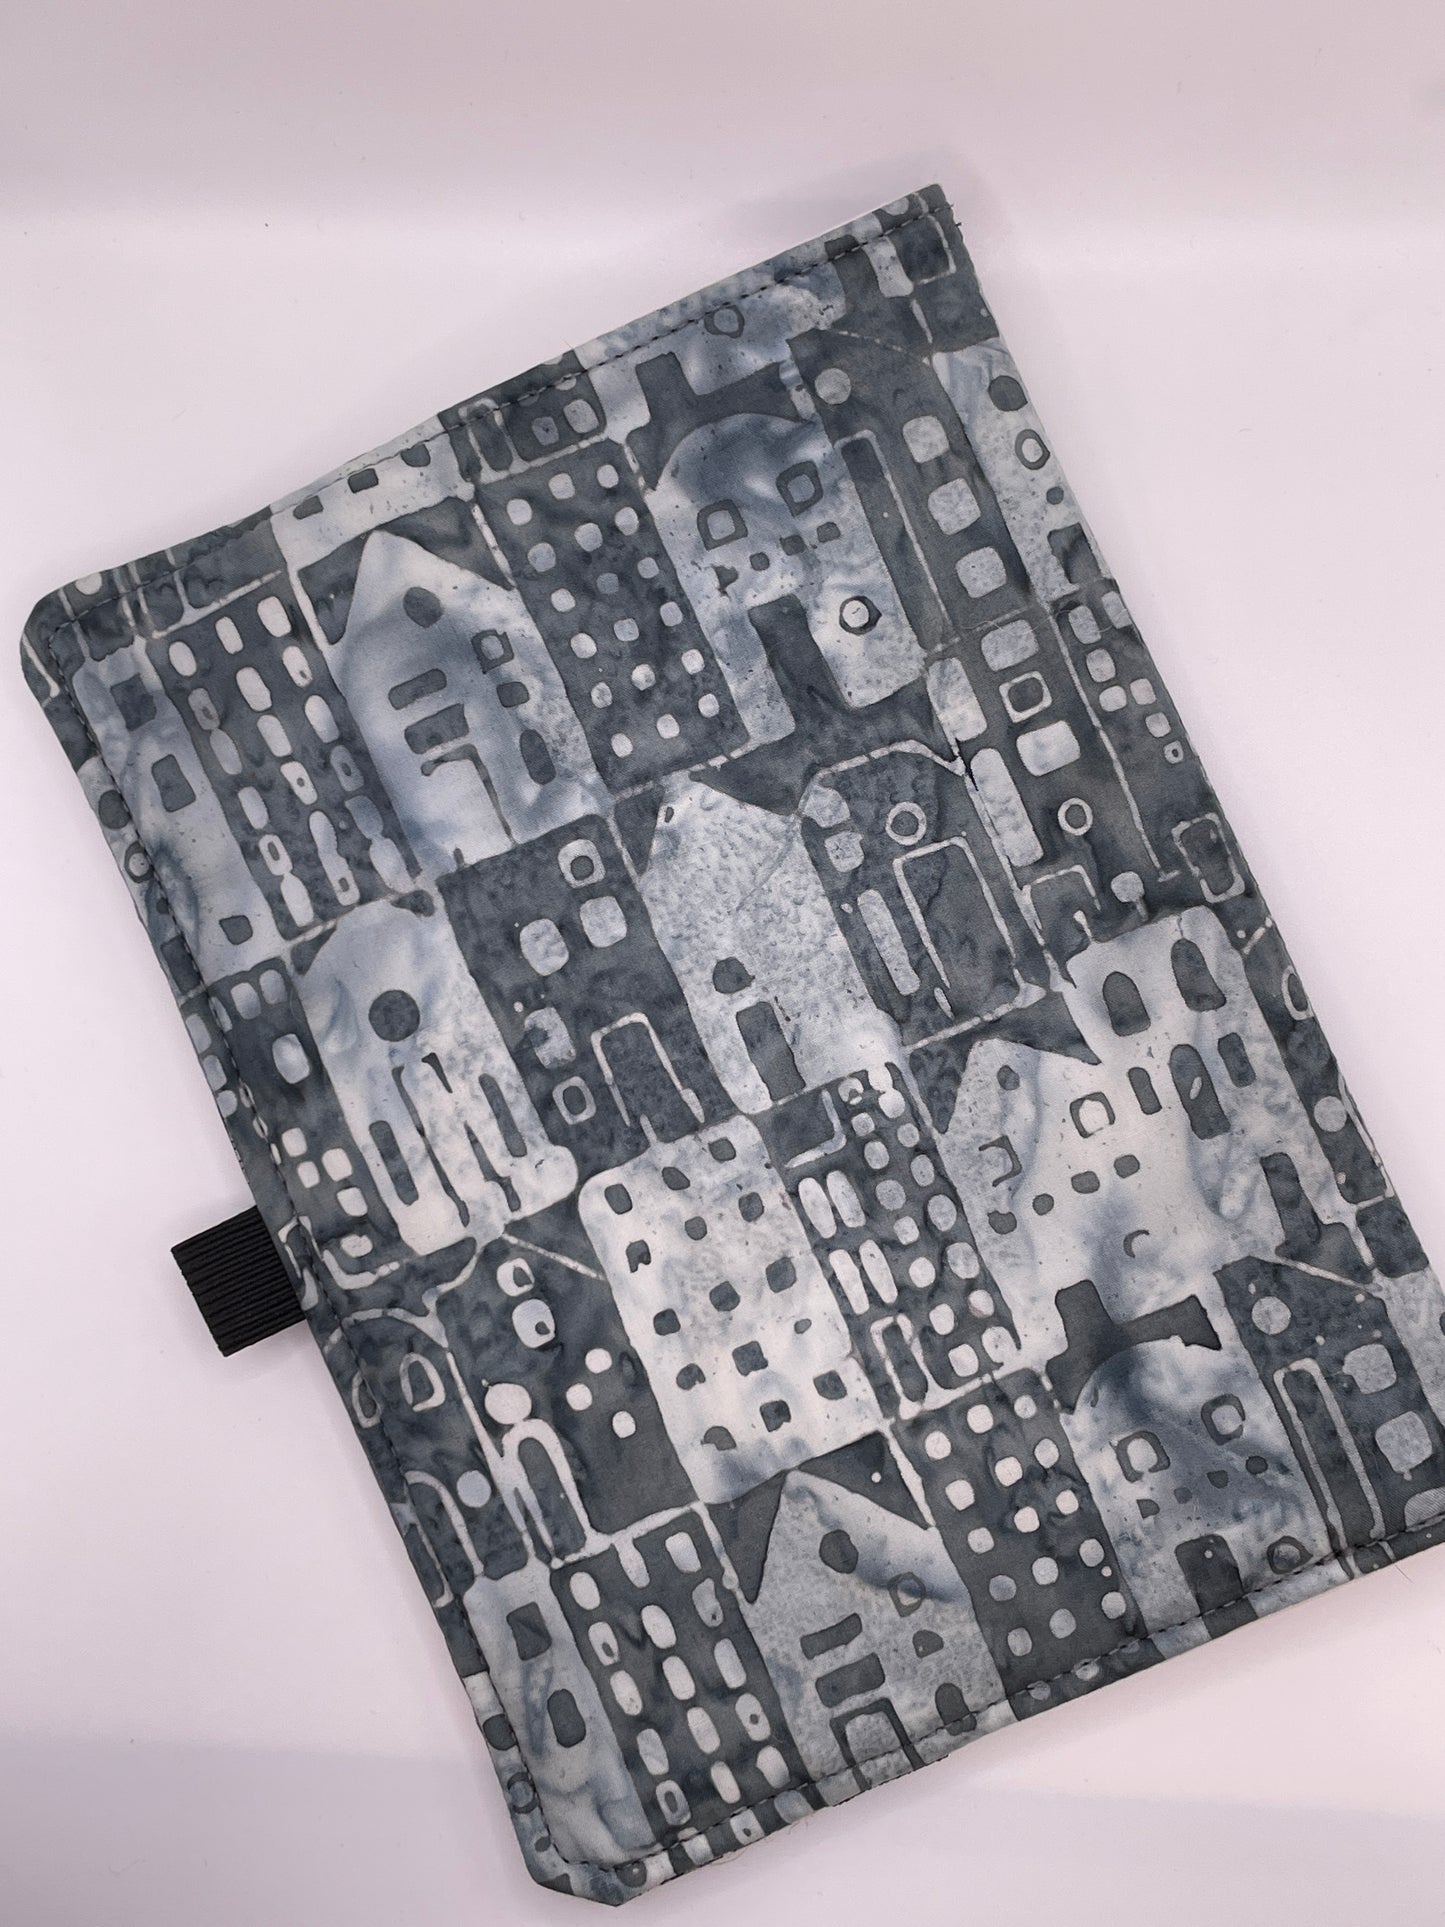 Cotton A5 Journal Covers with Zipper Pocket